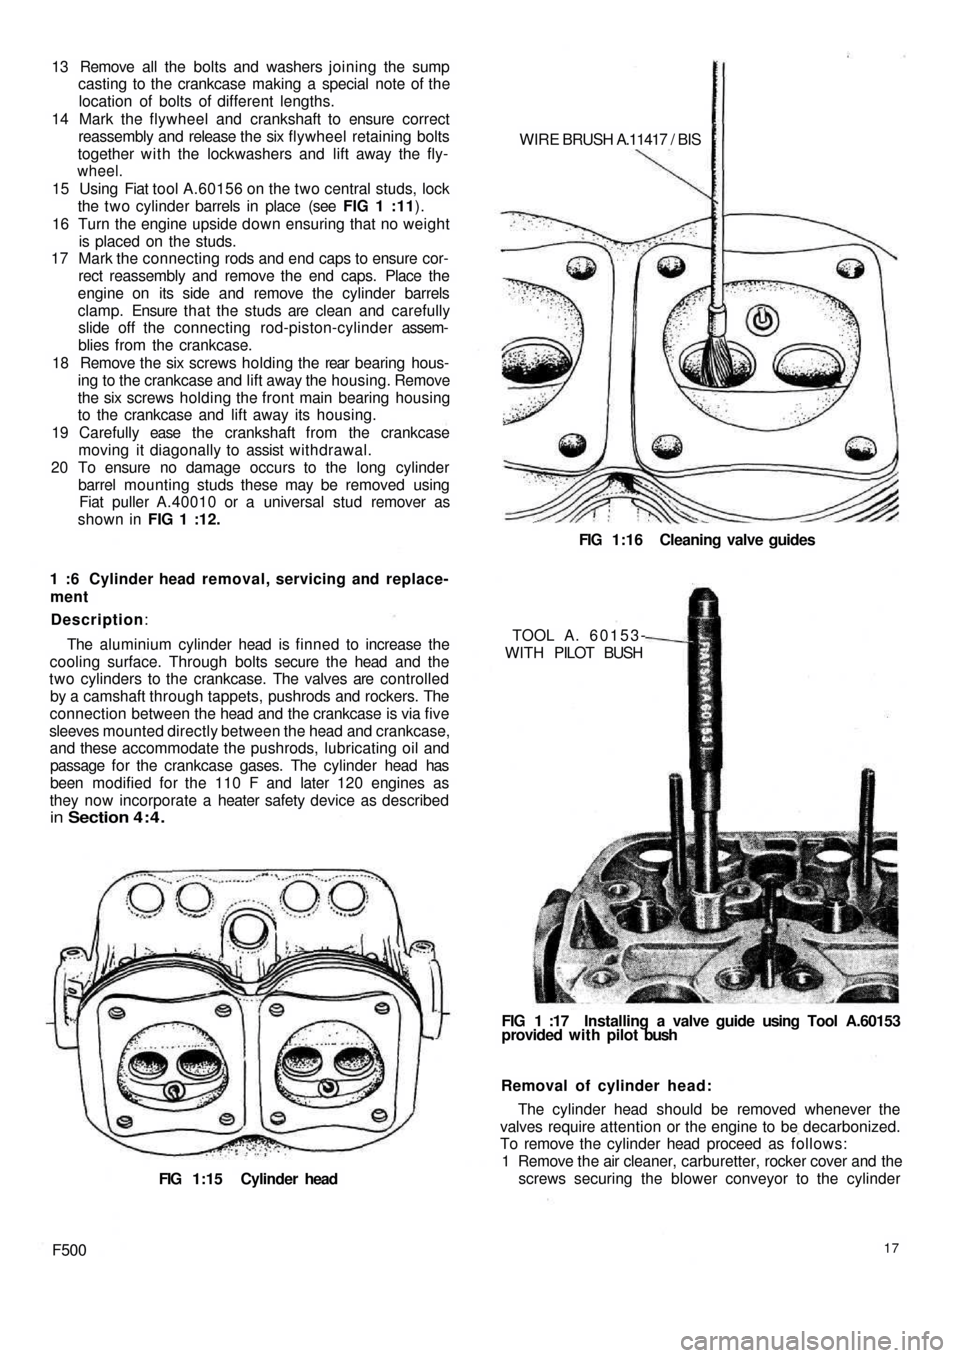 FIAT 500 1972 1.G Workshop Manual 13  Remove all the bolts and washers joining the sump
casting to the crankcase making a special note of the
location of bolts of different lengths.
14 Mark the flywheel and crankshaft to ensure correc